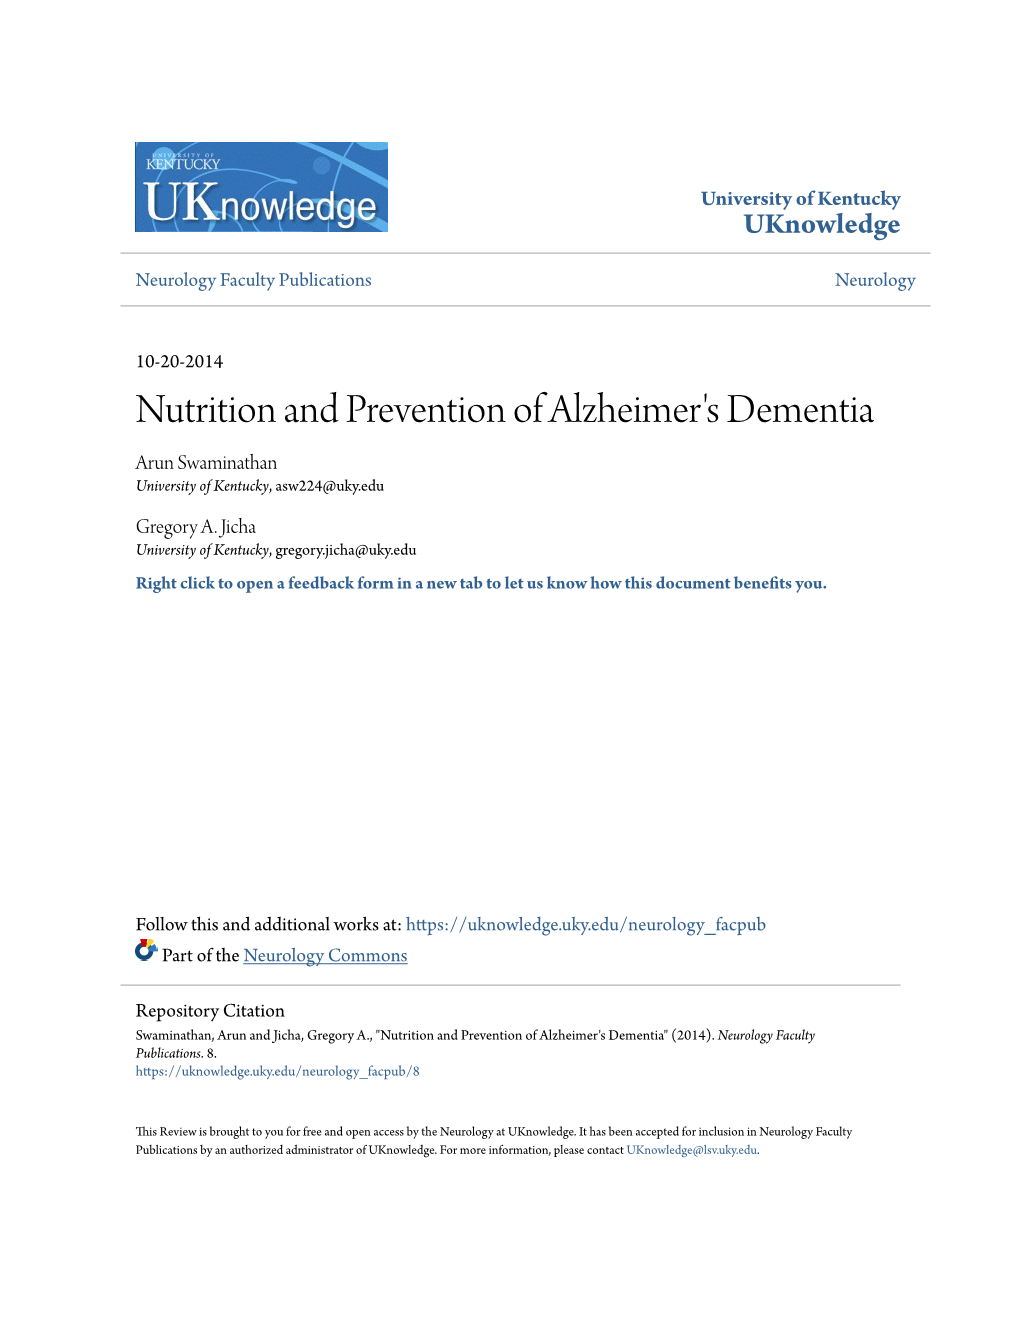 Nutrition and Prevention of Alzheimer's Dementia Arun Swaminathan University of Kentucky, Asw224@Uky.Edu